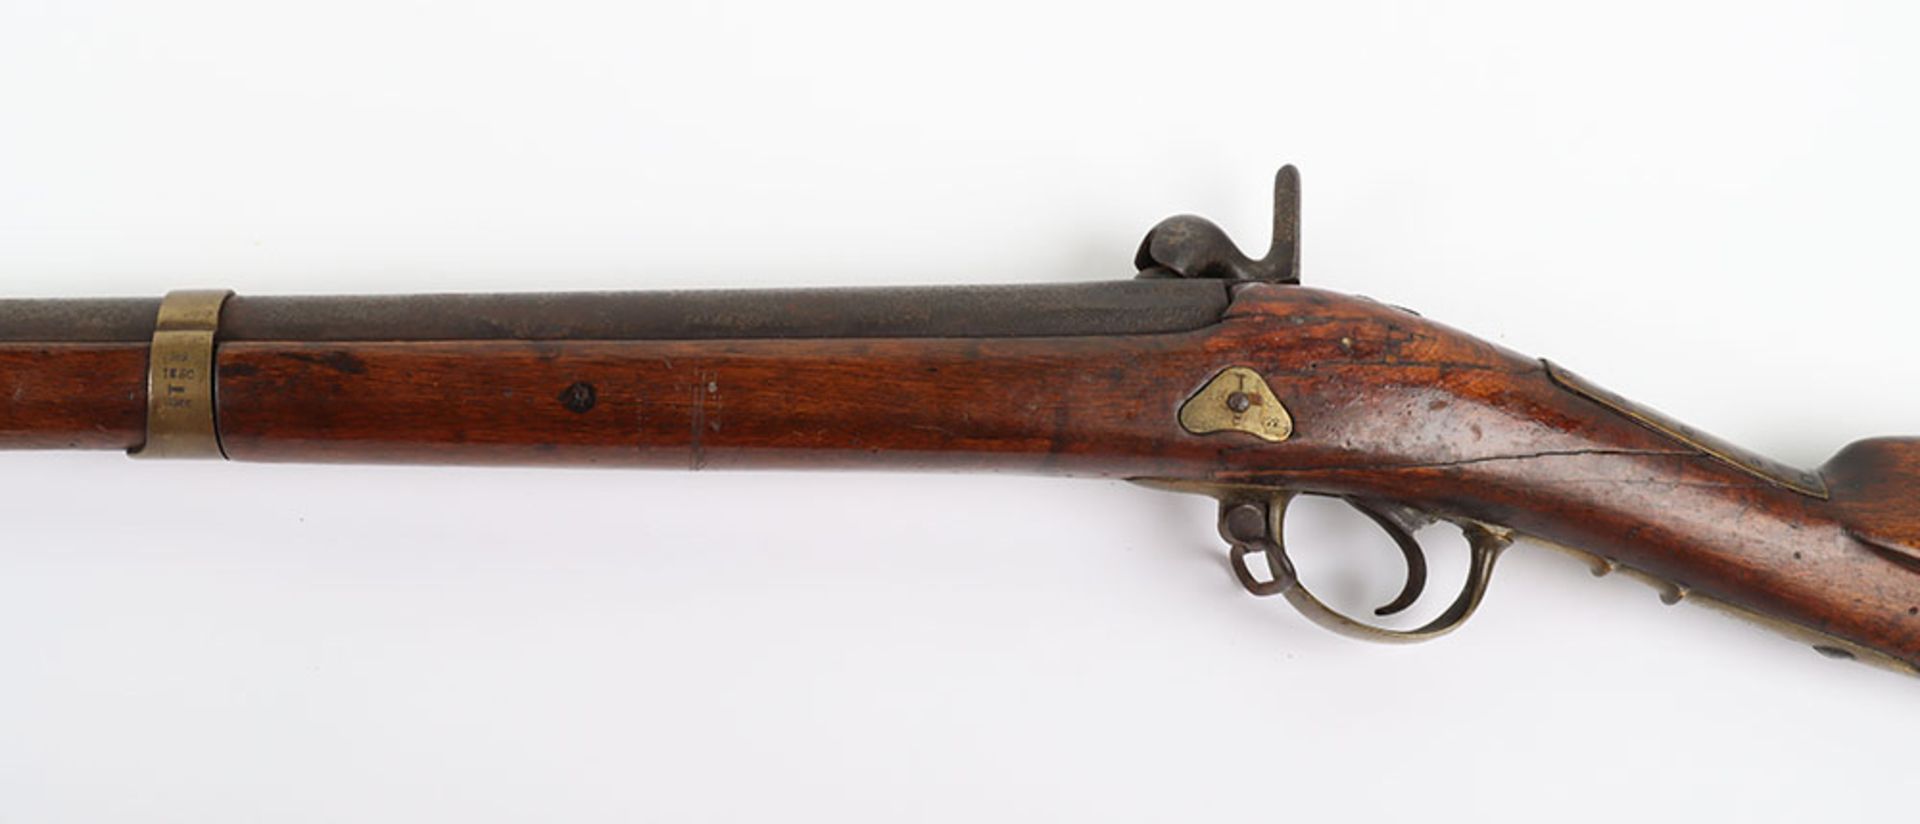 14-Bore Russian Back Action Military Musket - Image 12 of 17